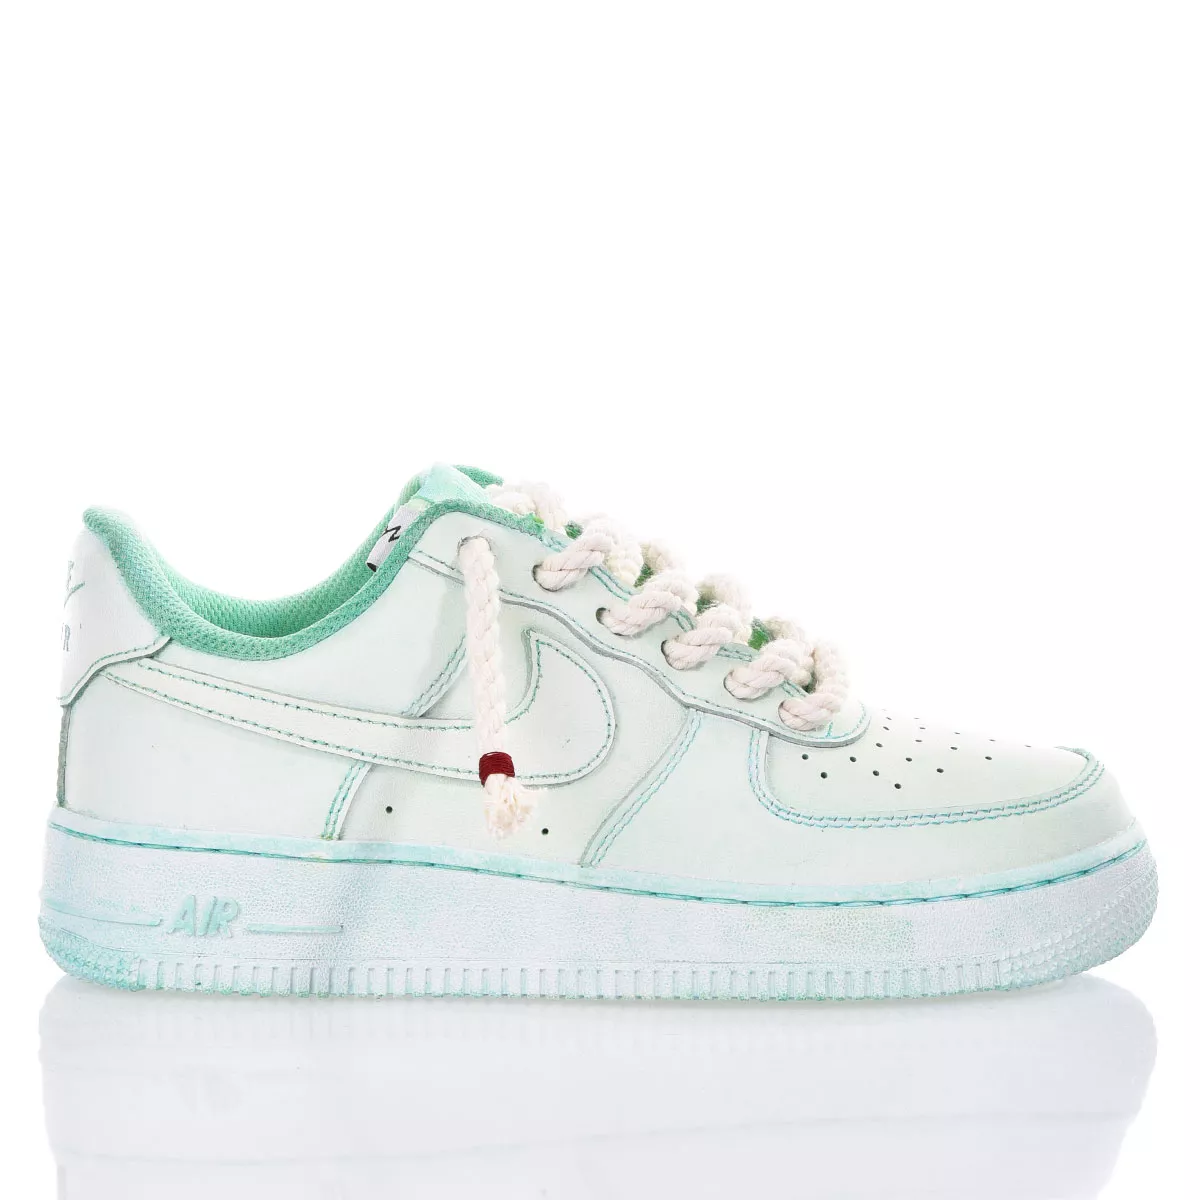 Nike Air Force 1 Low With Black Rope Laces White UNISEX Custom